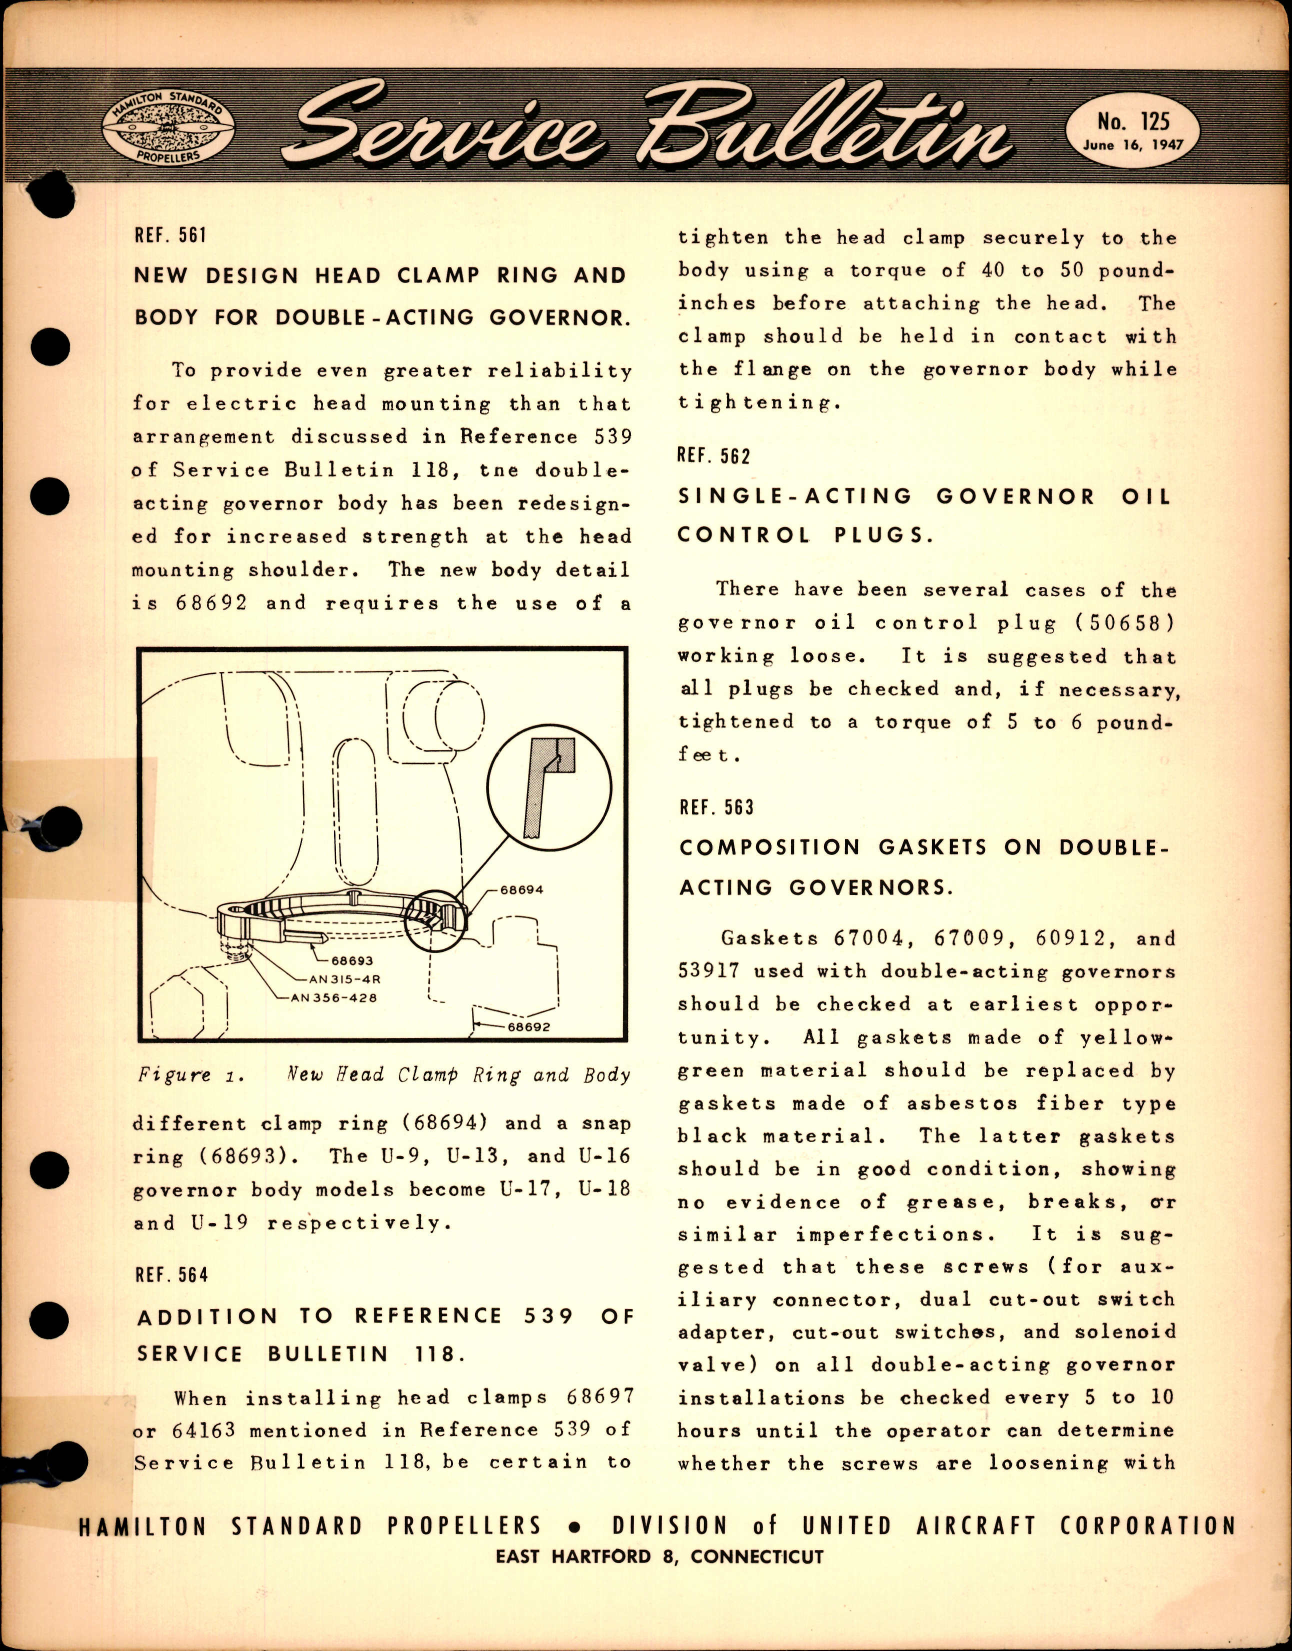 Sample page 1 from AirCorps Library document: New Design Head Clamp Ring and Body for Double-Acting Governor, Ref 561